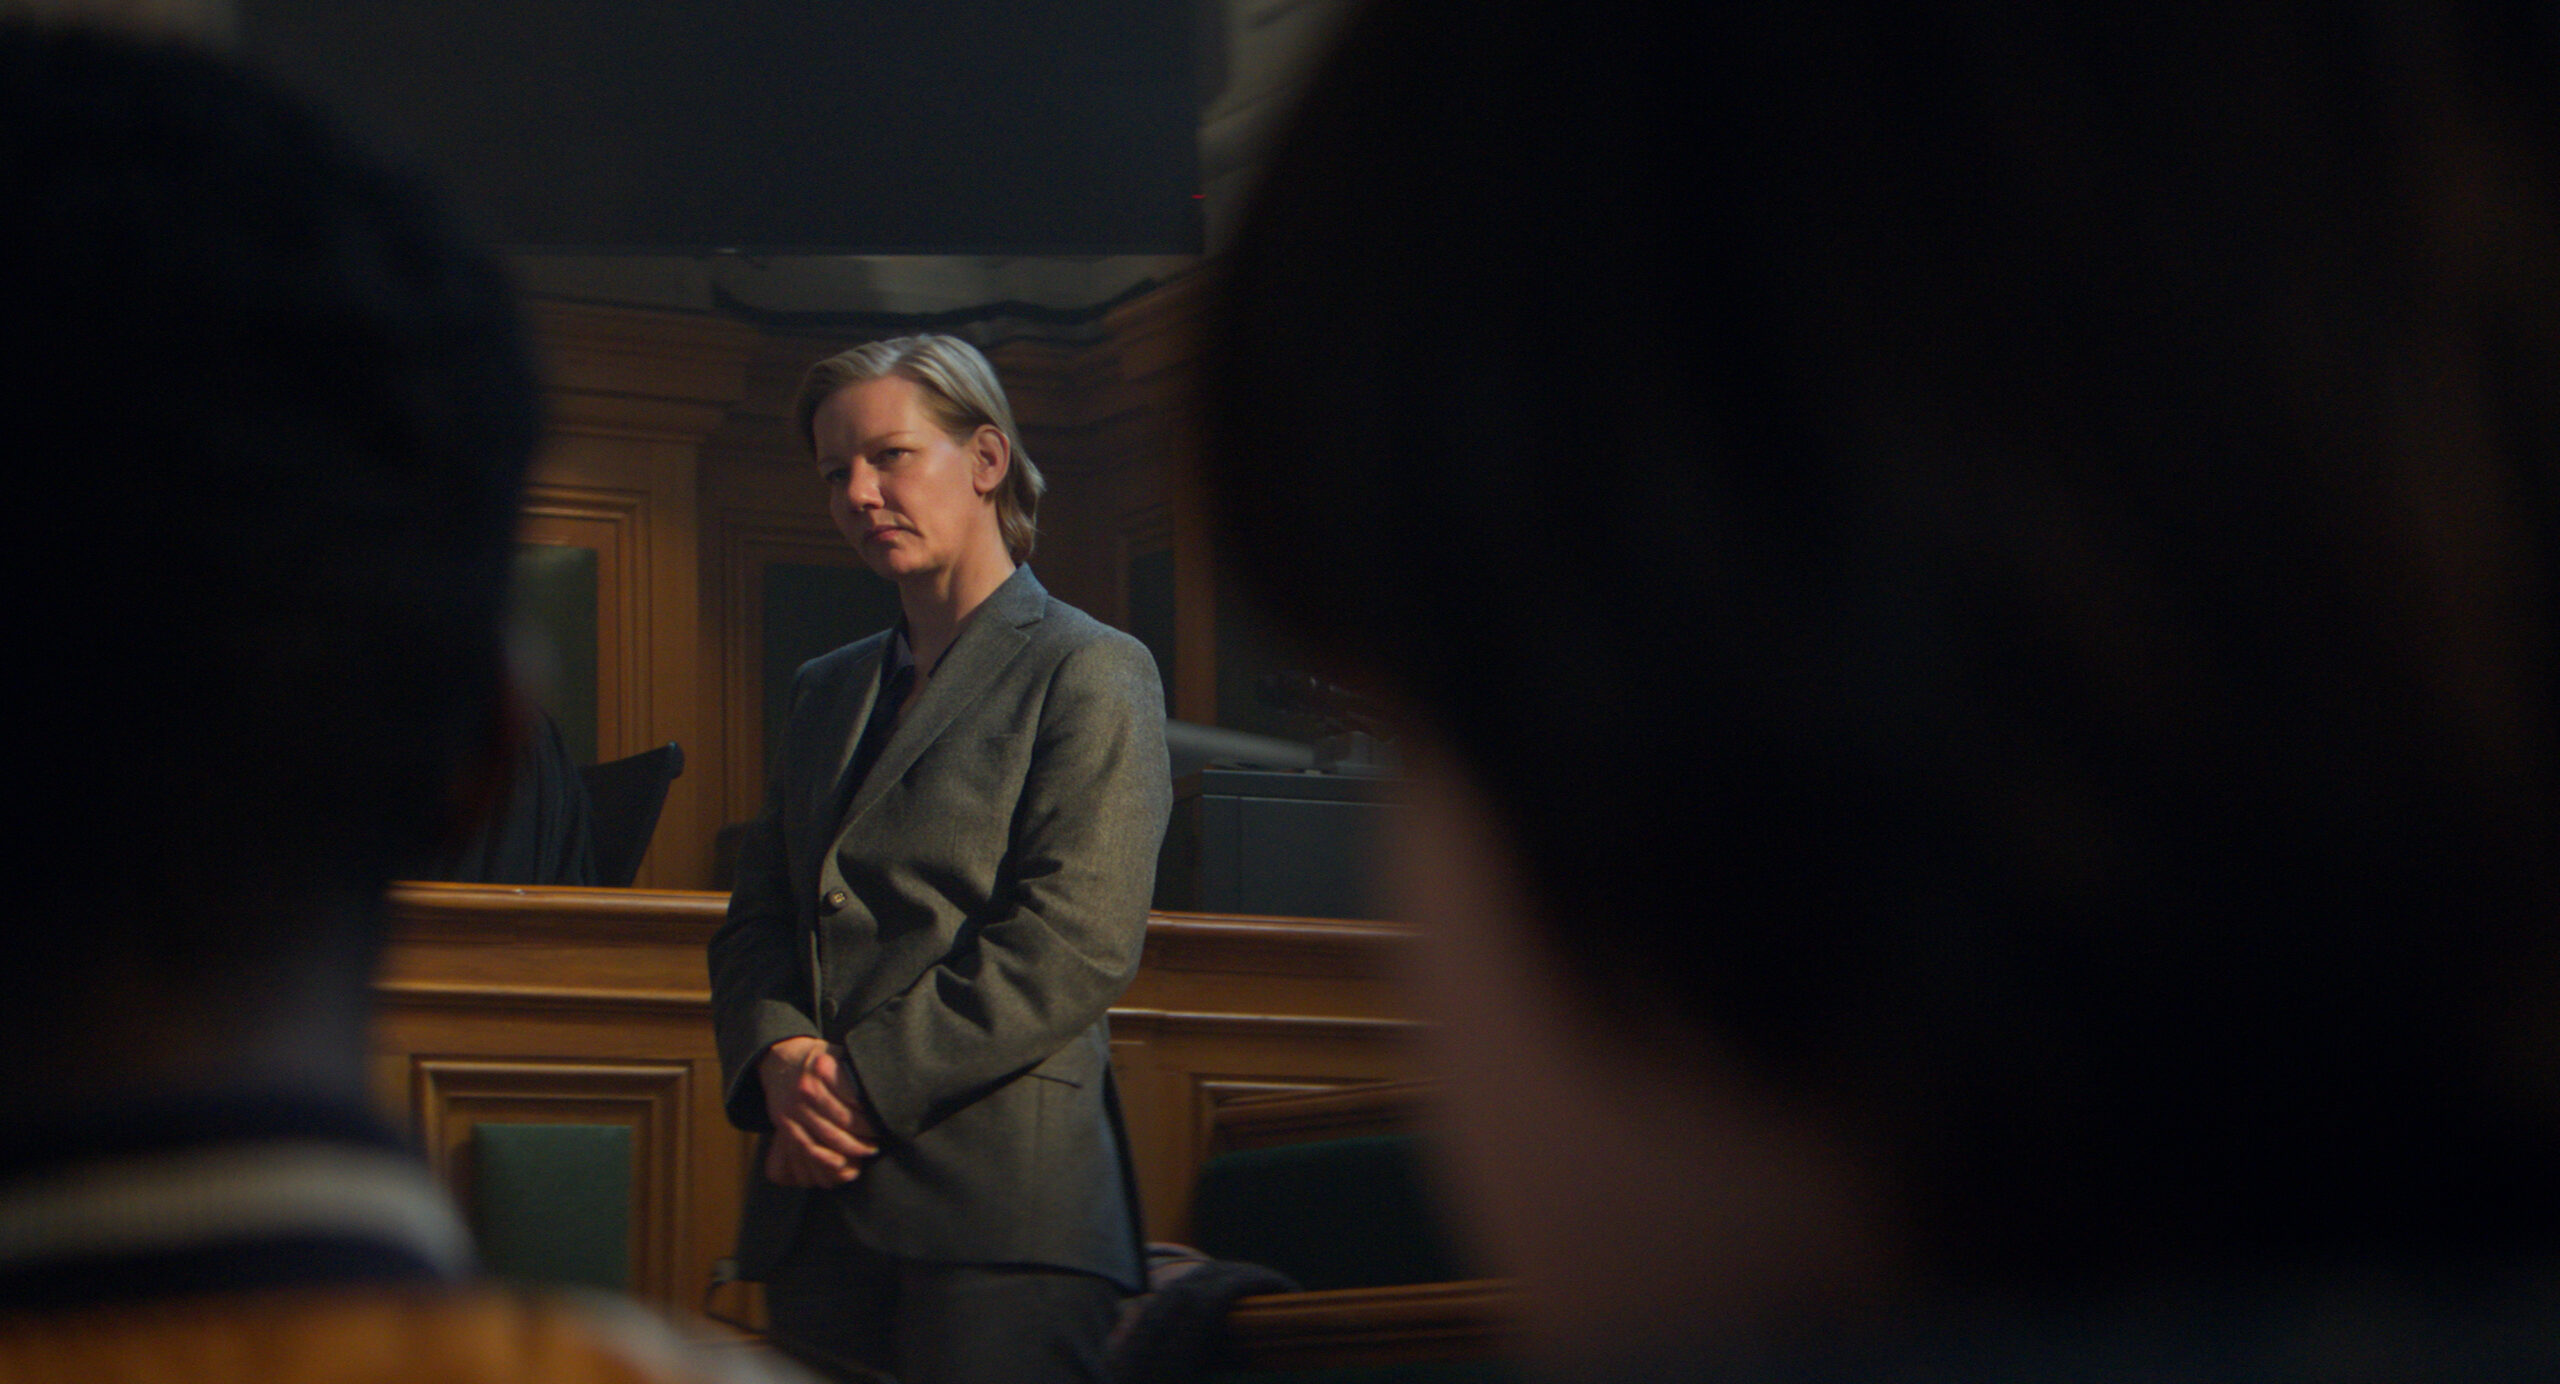 A woman in a grey pants suit stands in a court of law and is flanked by two heads in the audience in Justine Triet's Anatomy of a Fall. The festival also includes Fancy Dance, National Anthem, The Promised Land, and more.